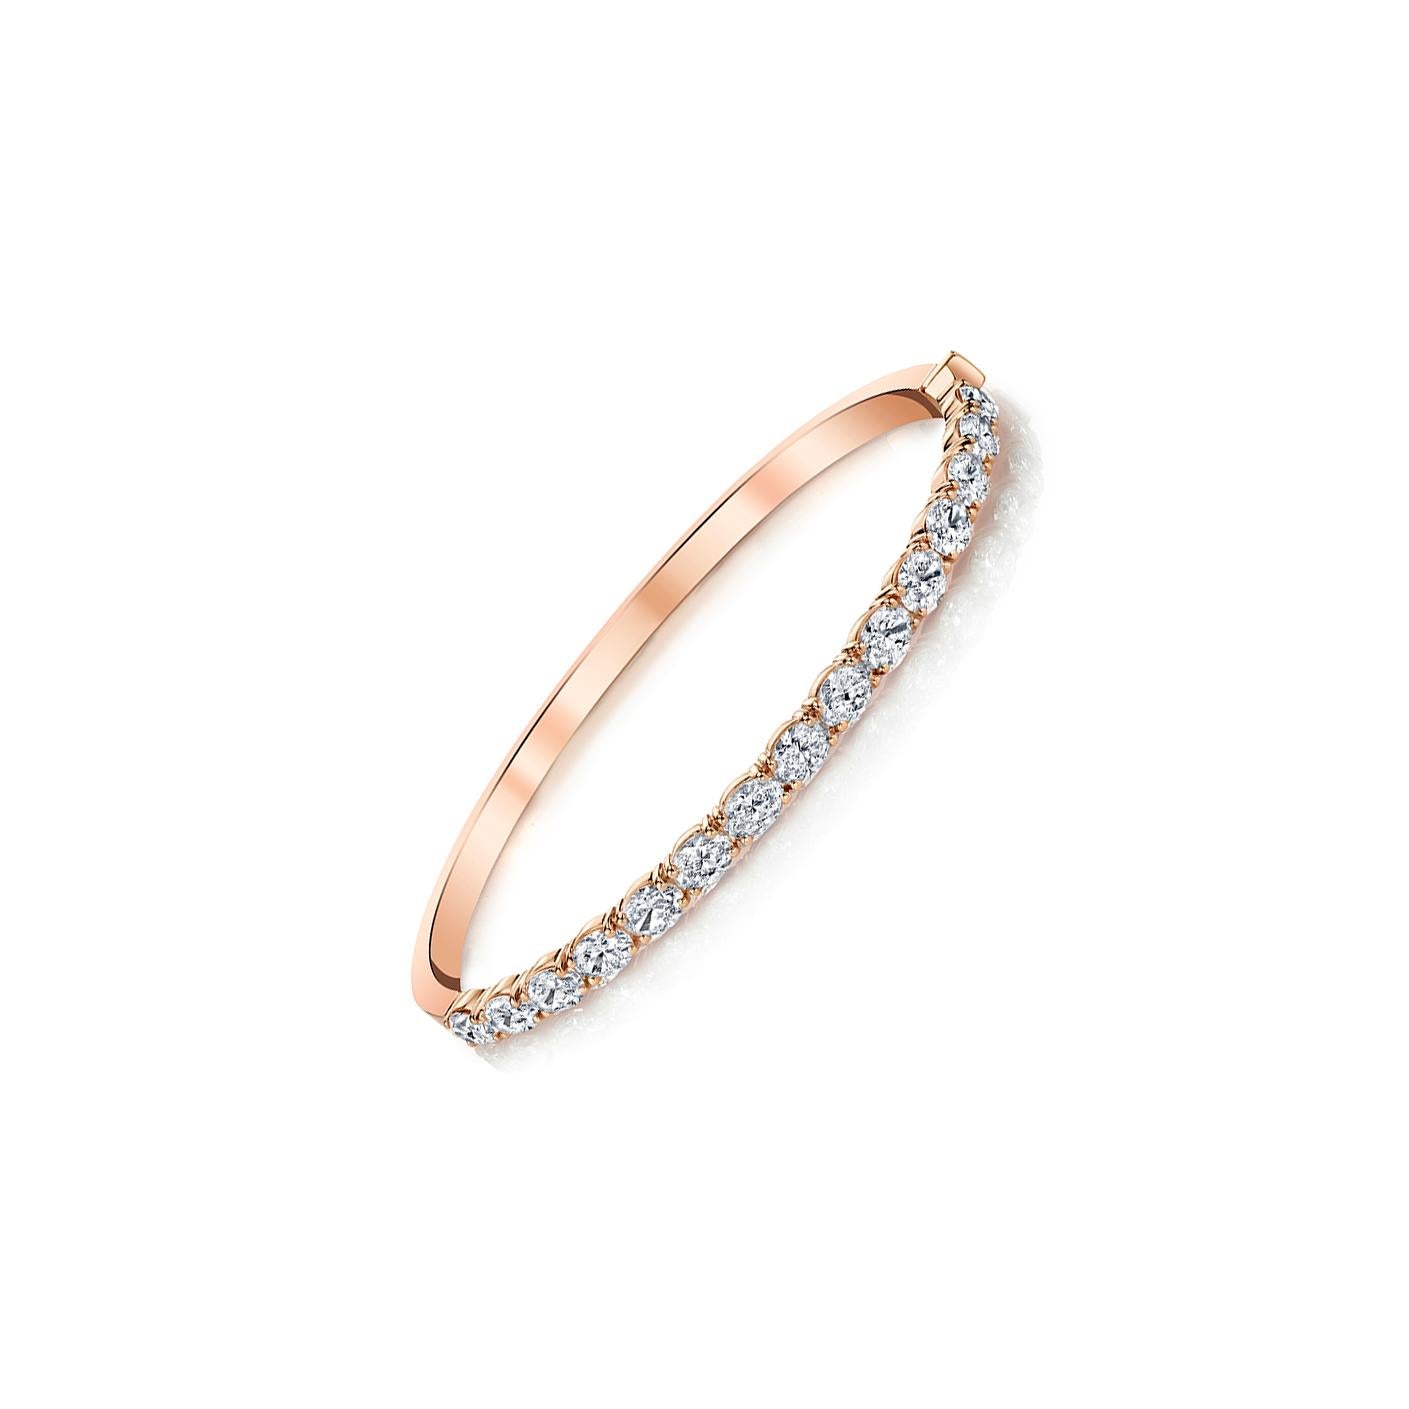 15 Oval-cut diamonds set in 18k rose gold 4-prong bangle bracelet. 
Carat total weight 4.51
GIA Color D-F Clarity VVS2-VS2 
Also available in 18k white and yellow gold.